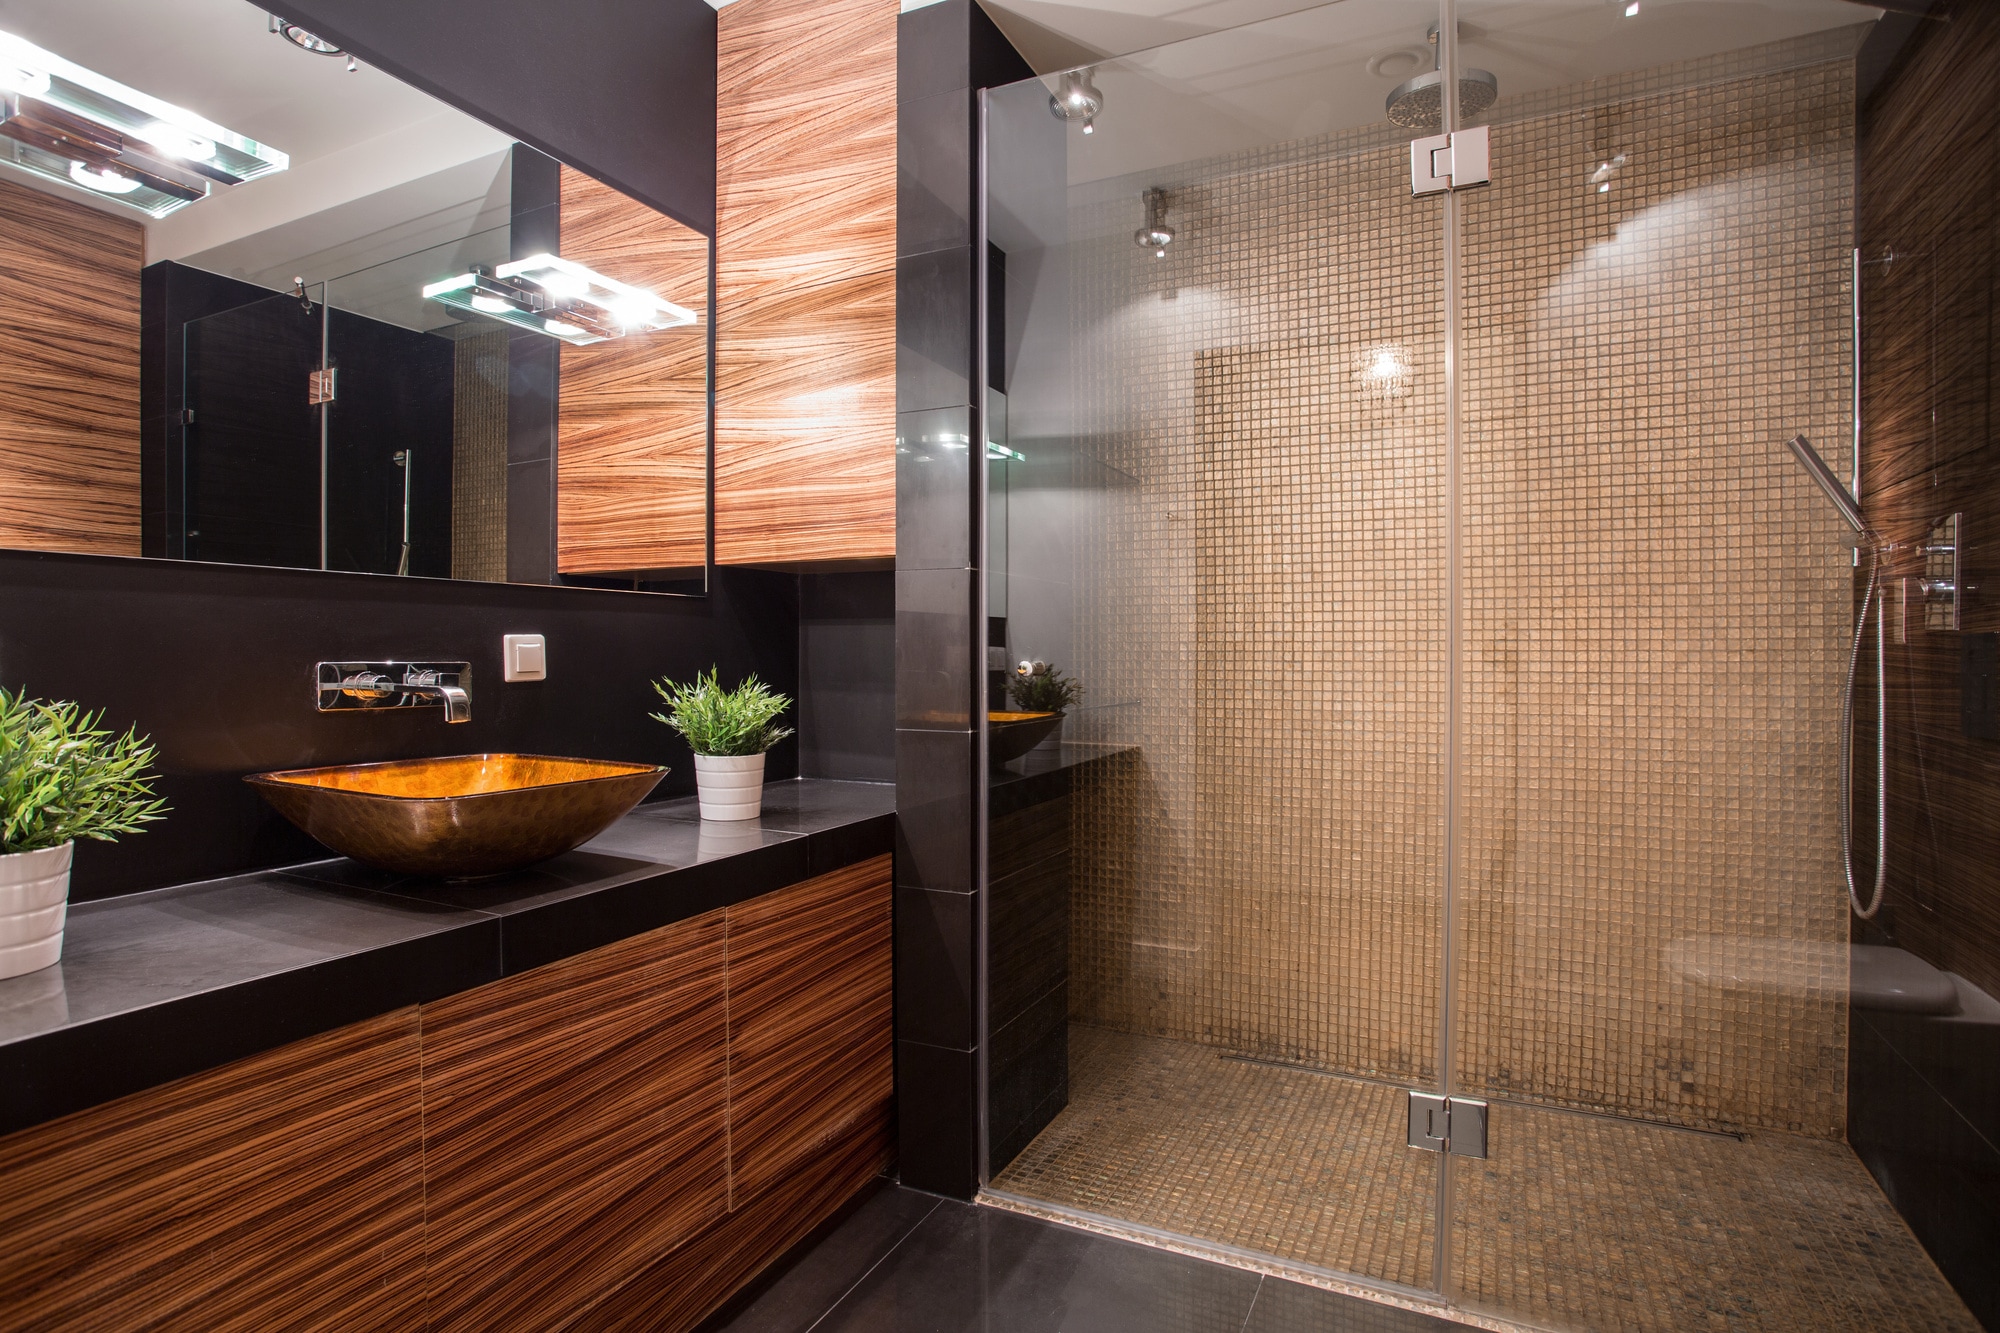 Convenient and Stylish Shower Storage Solutions for Any Modern Bathroom